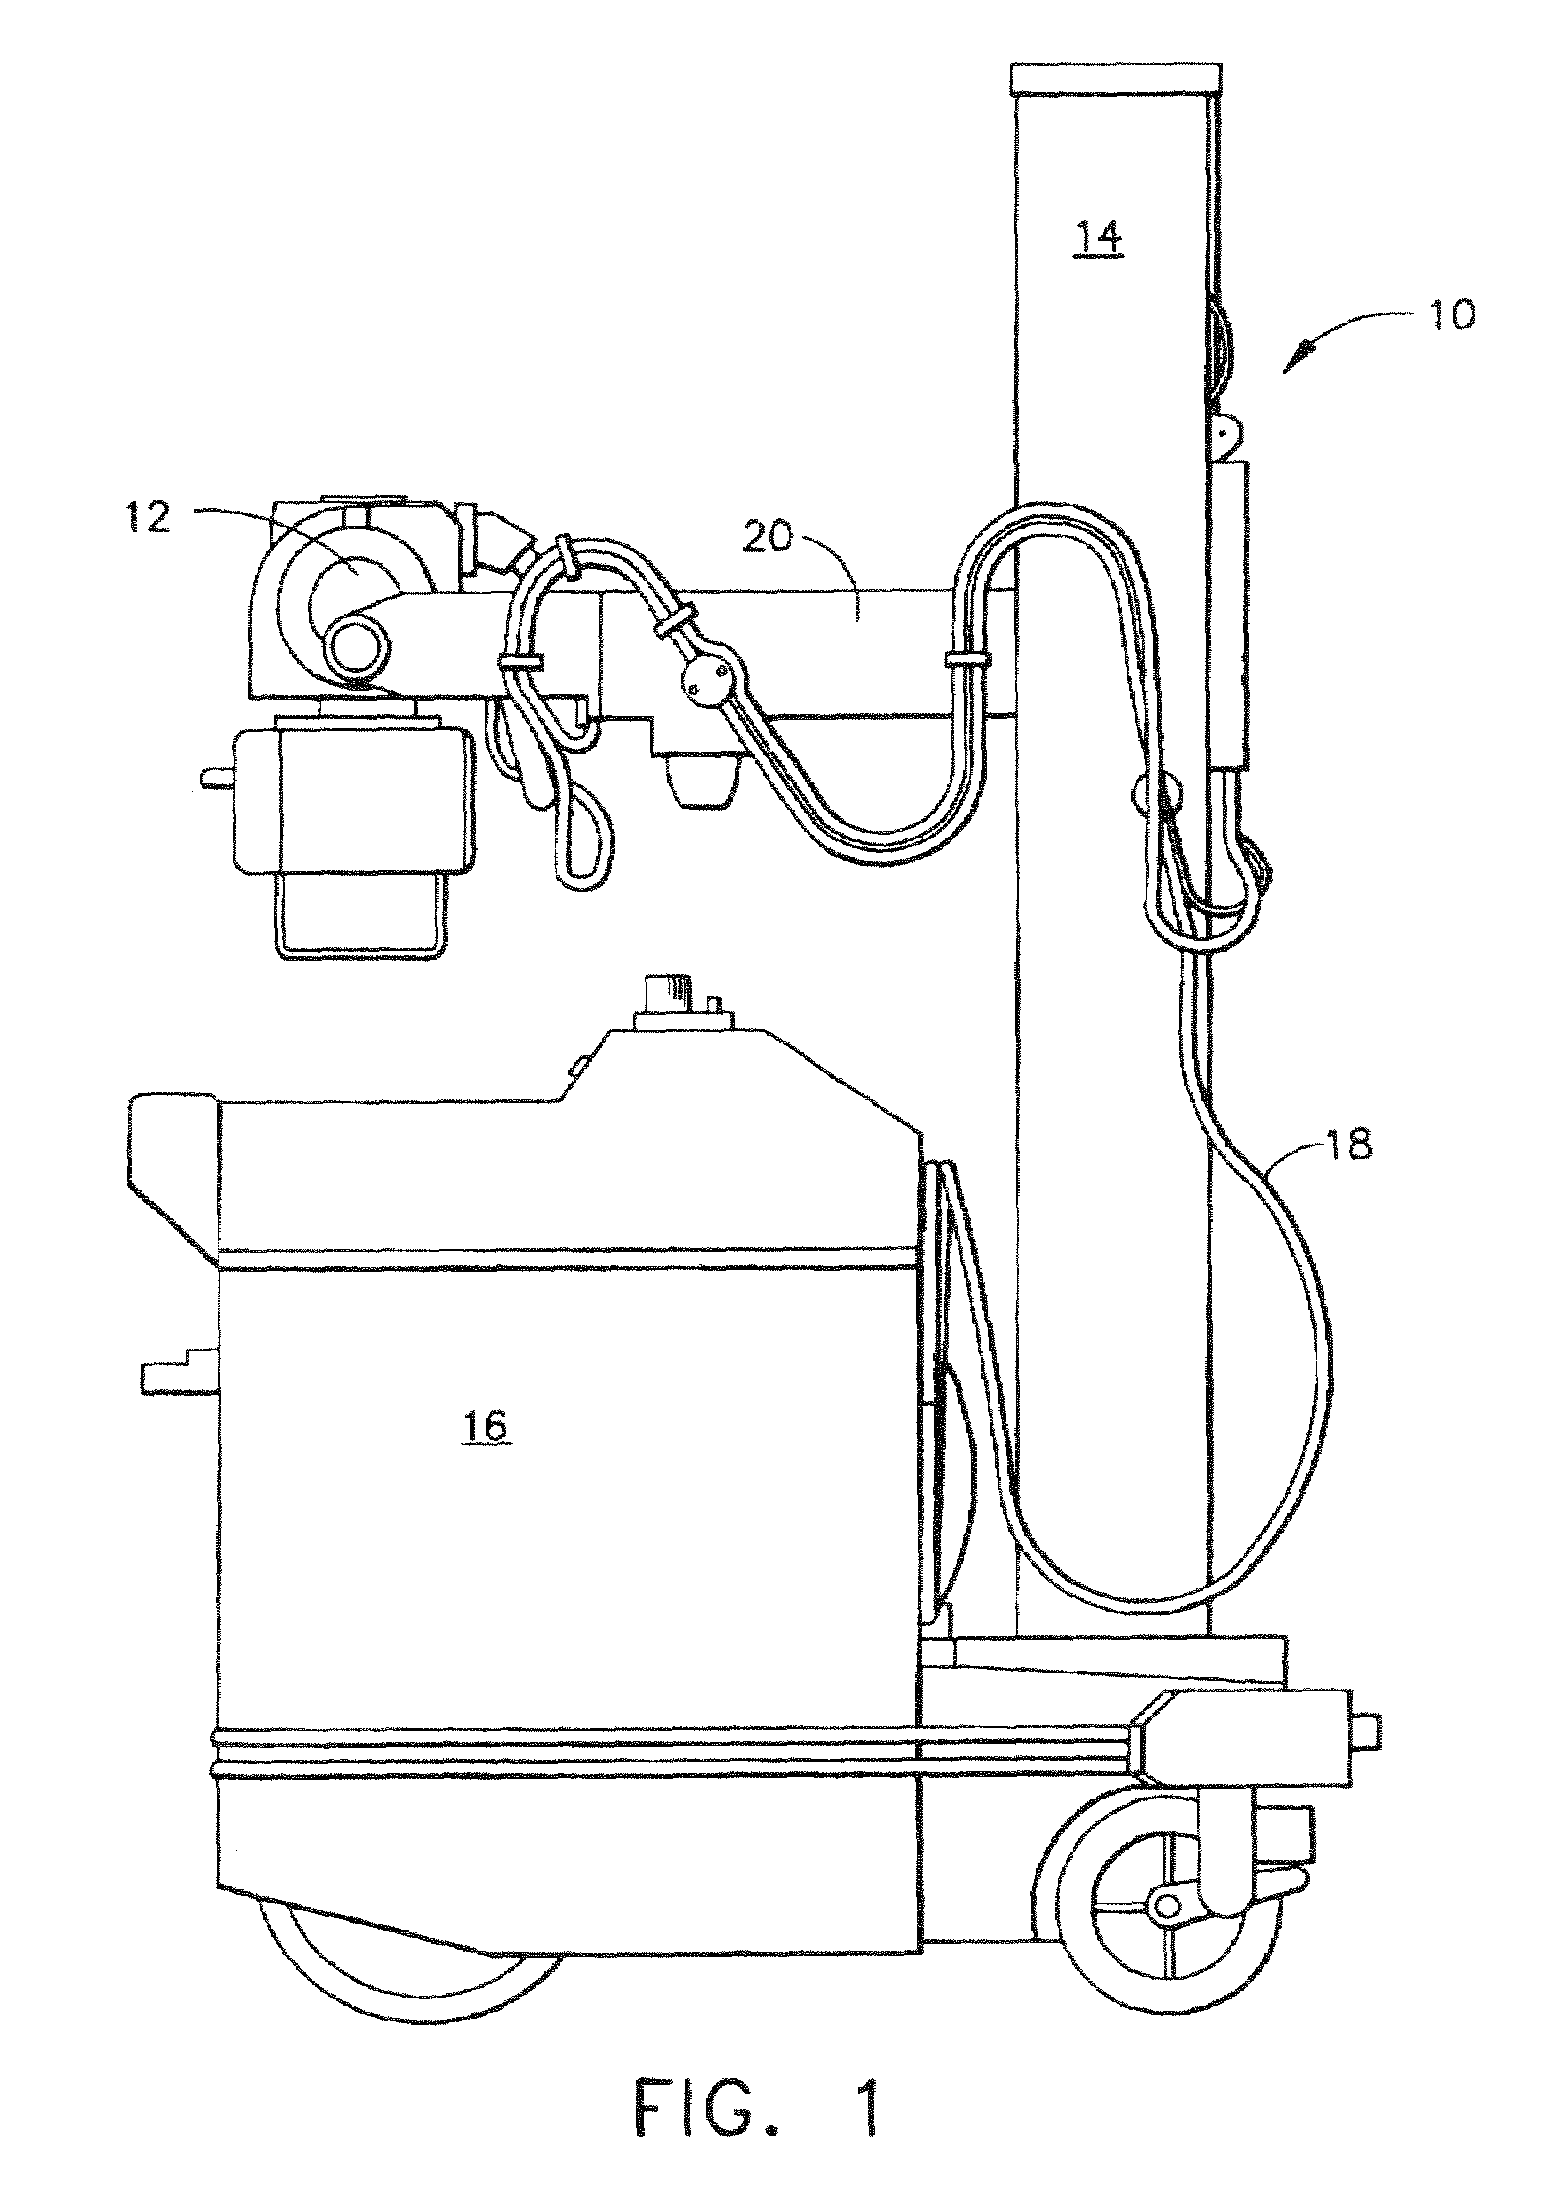 X-ray detector having an accelerometer